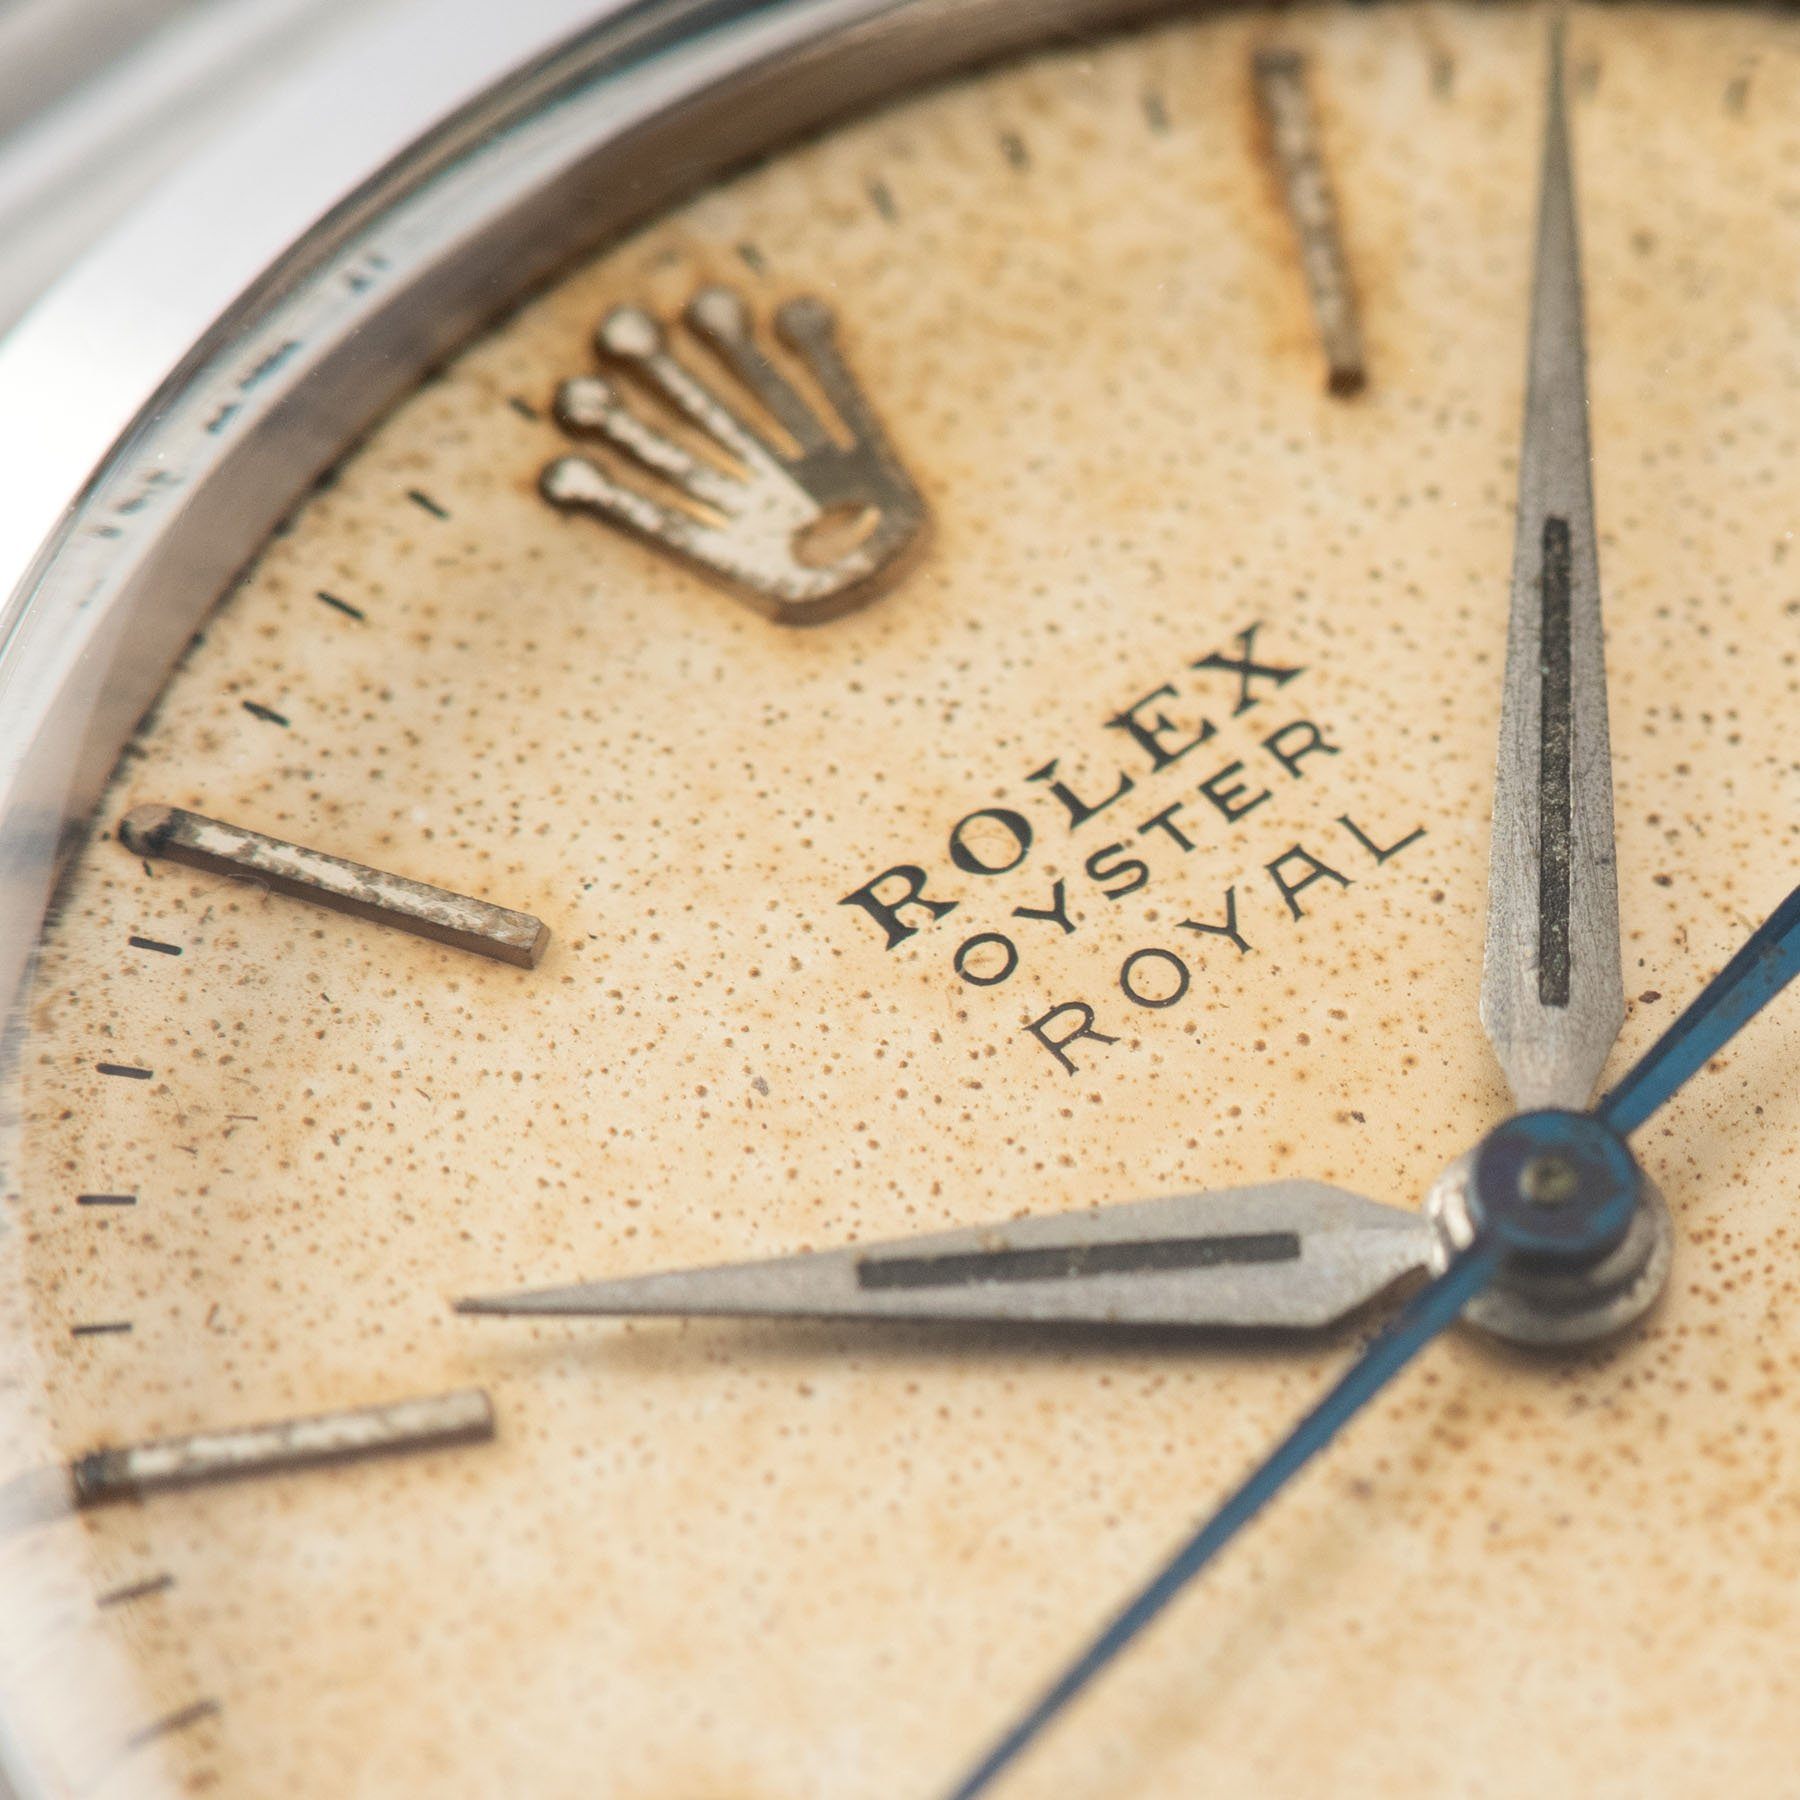 Rolex Oyster Royal Precision Dial 6426